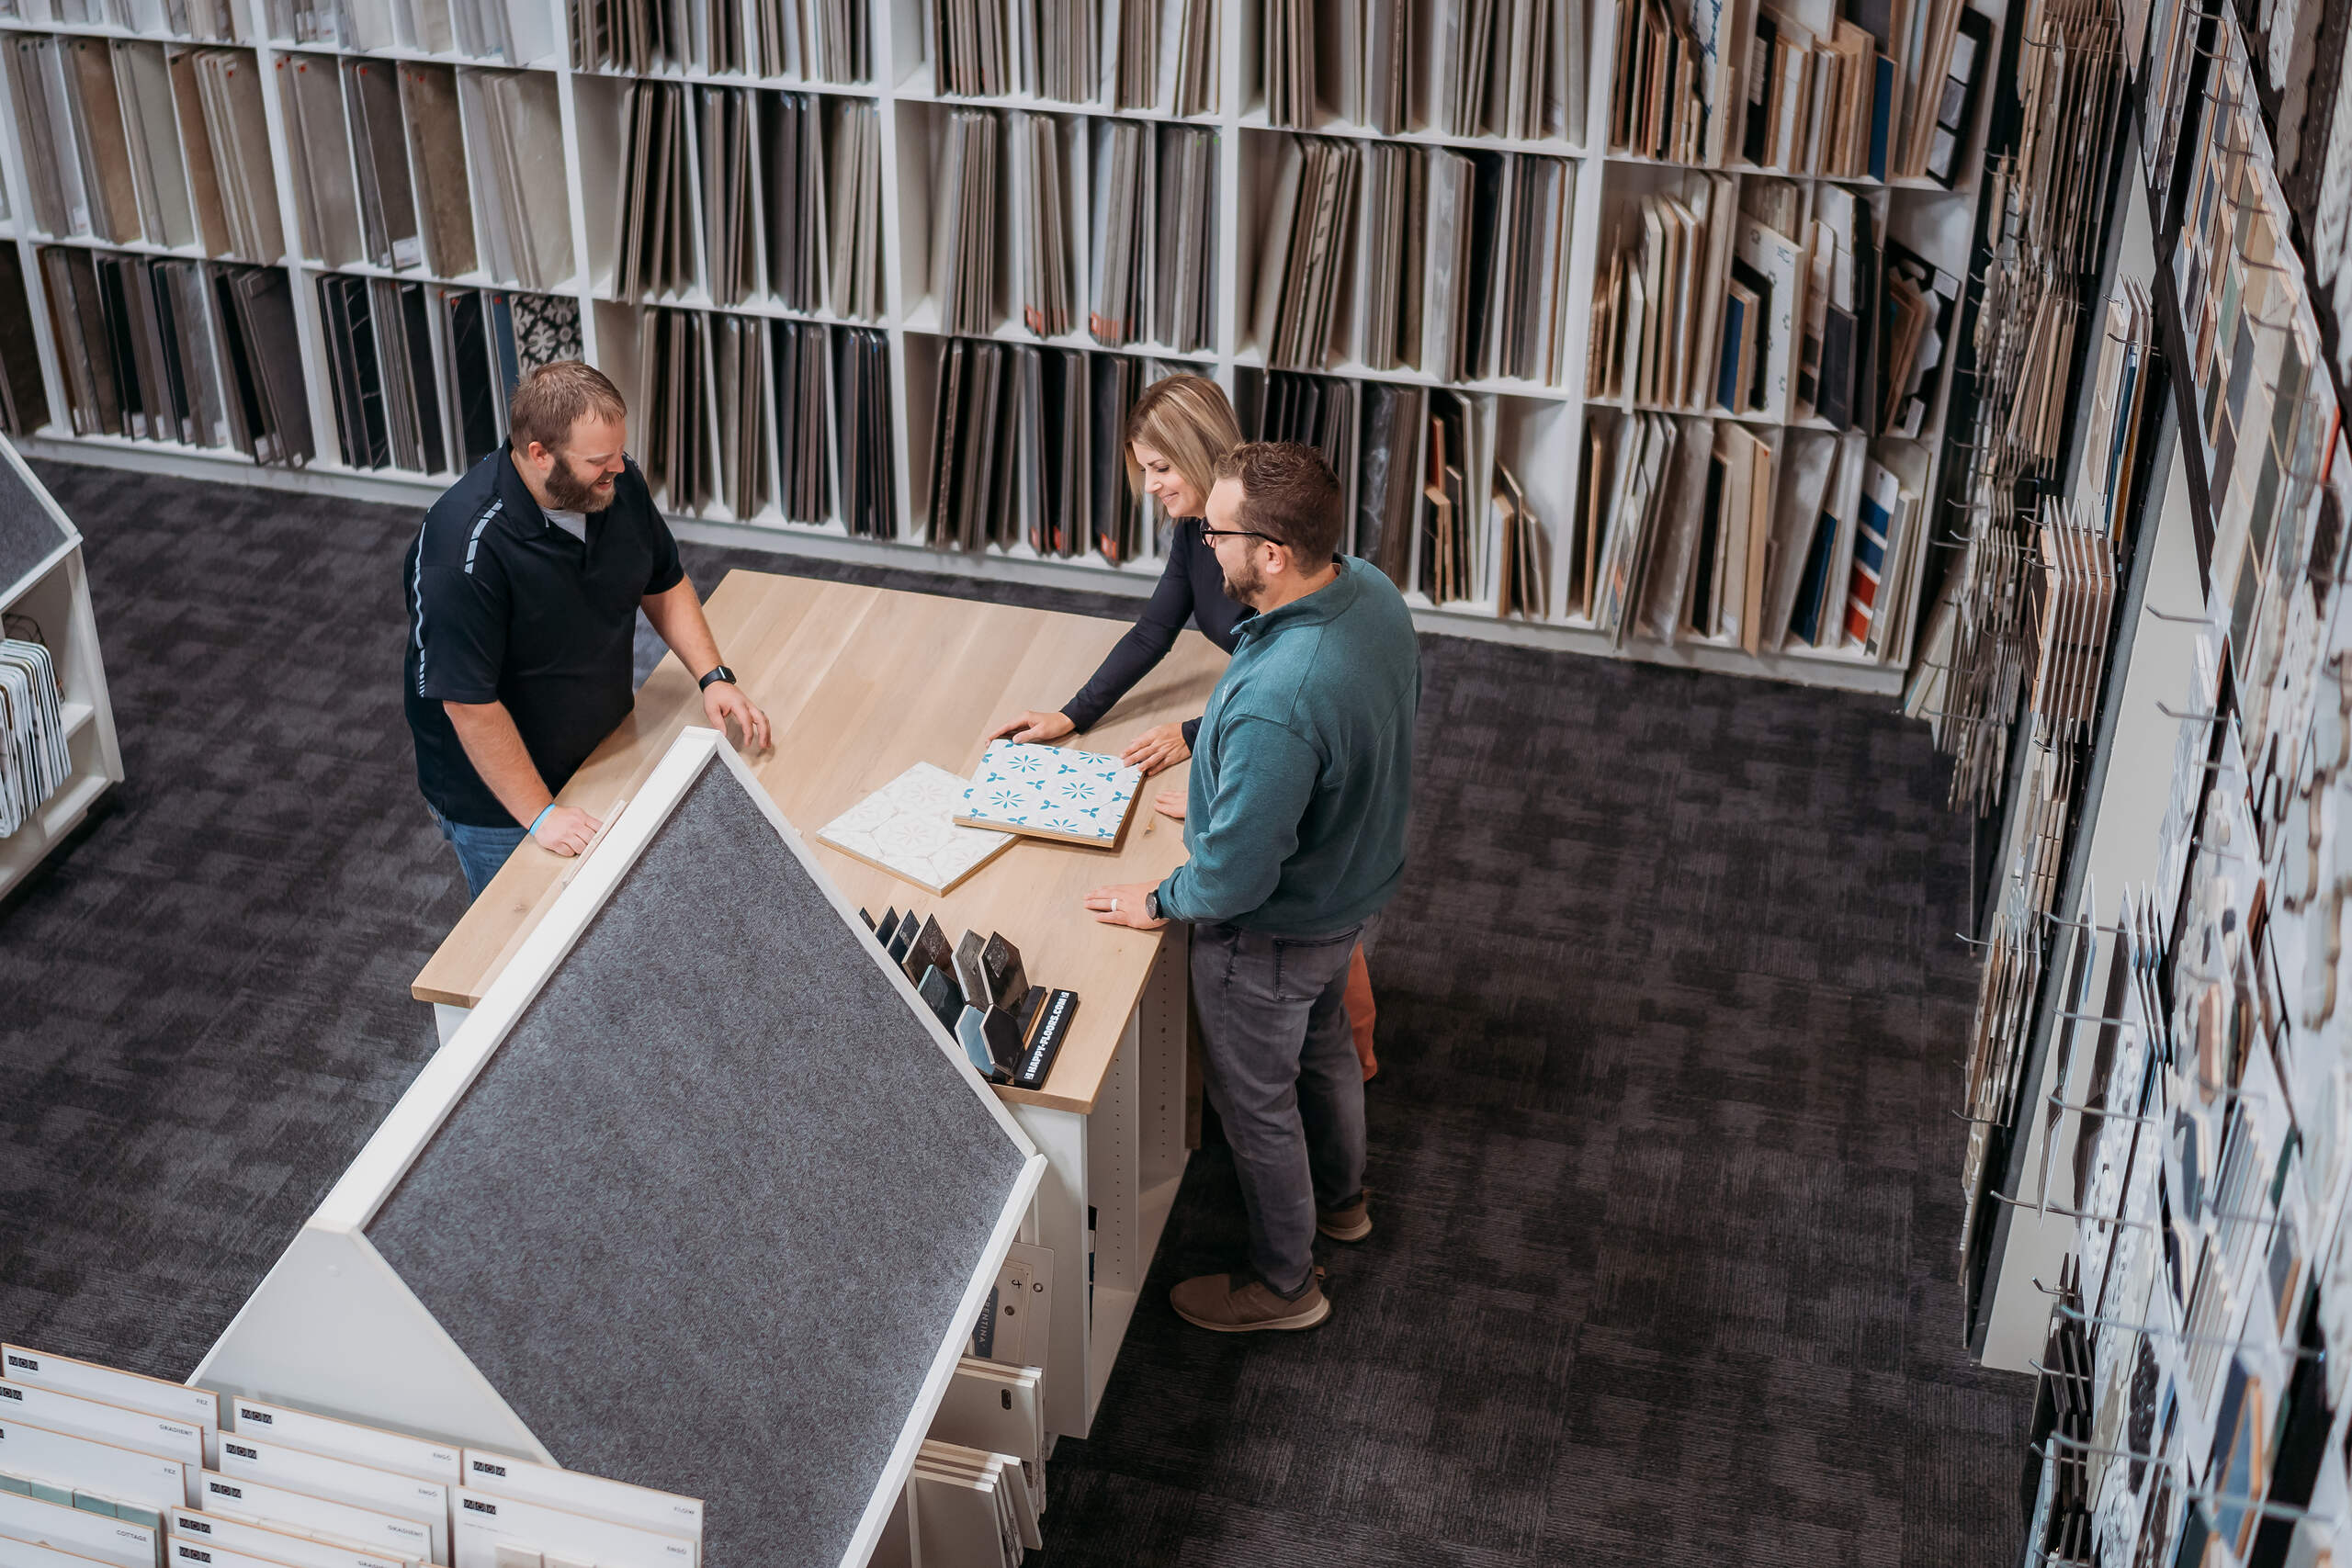 Three professionals collaborating over a map spread out on a table in a modern office environment, surrounded by shelves of documents and contact samples.